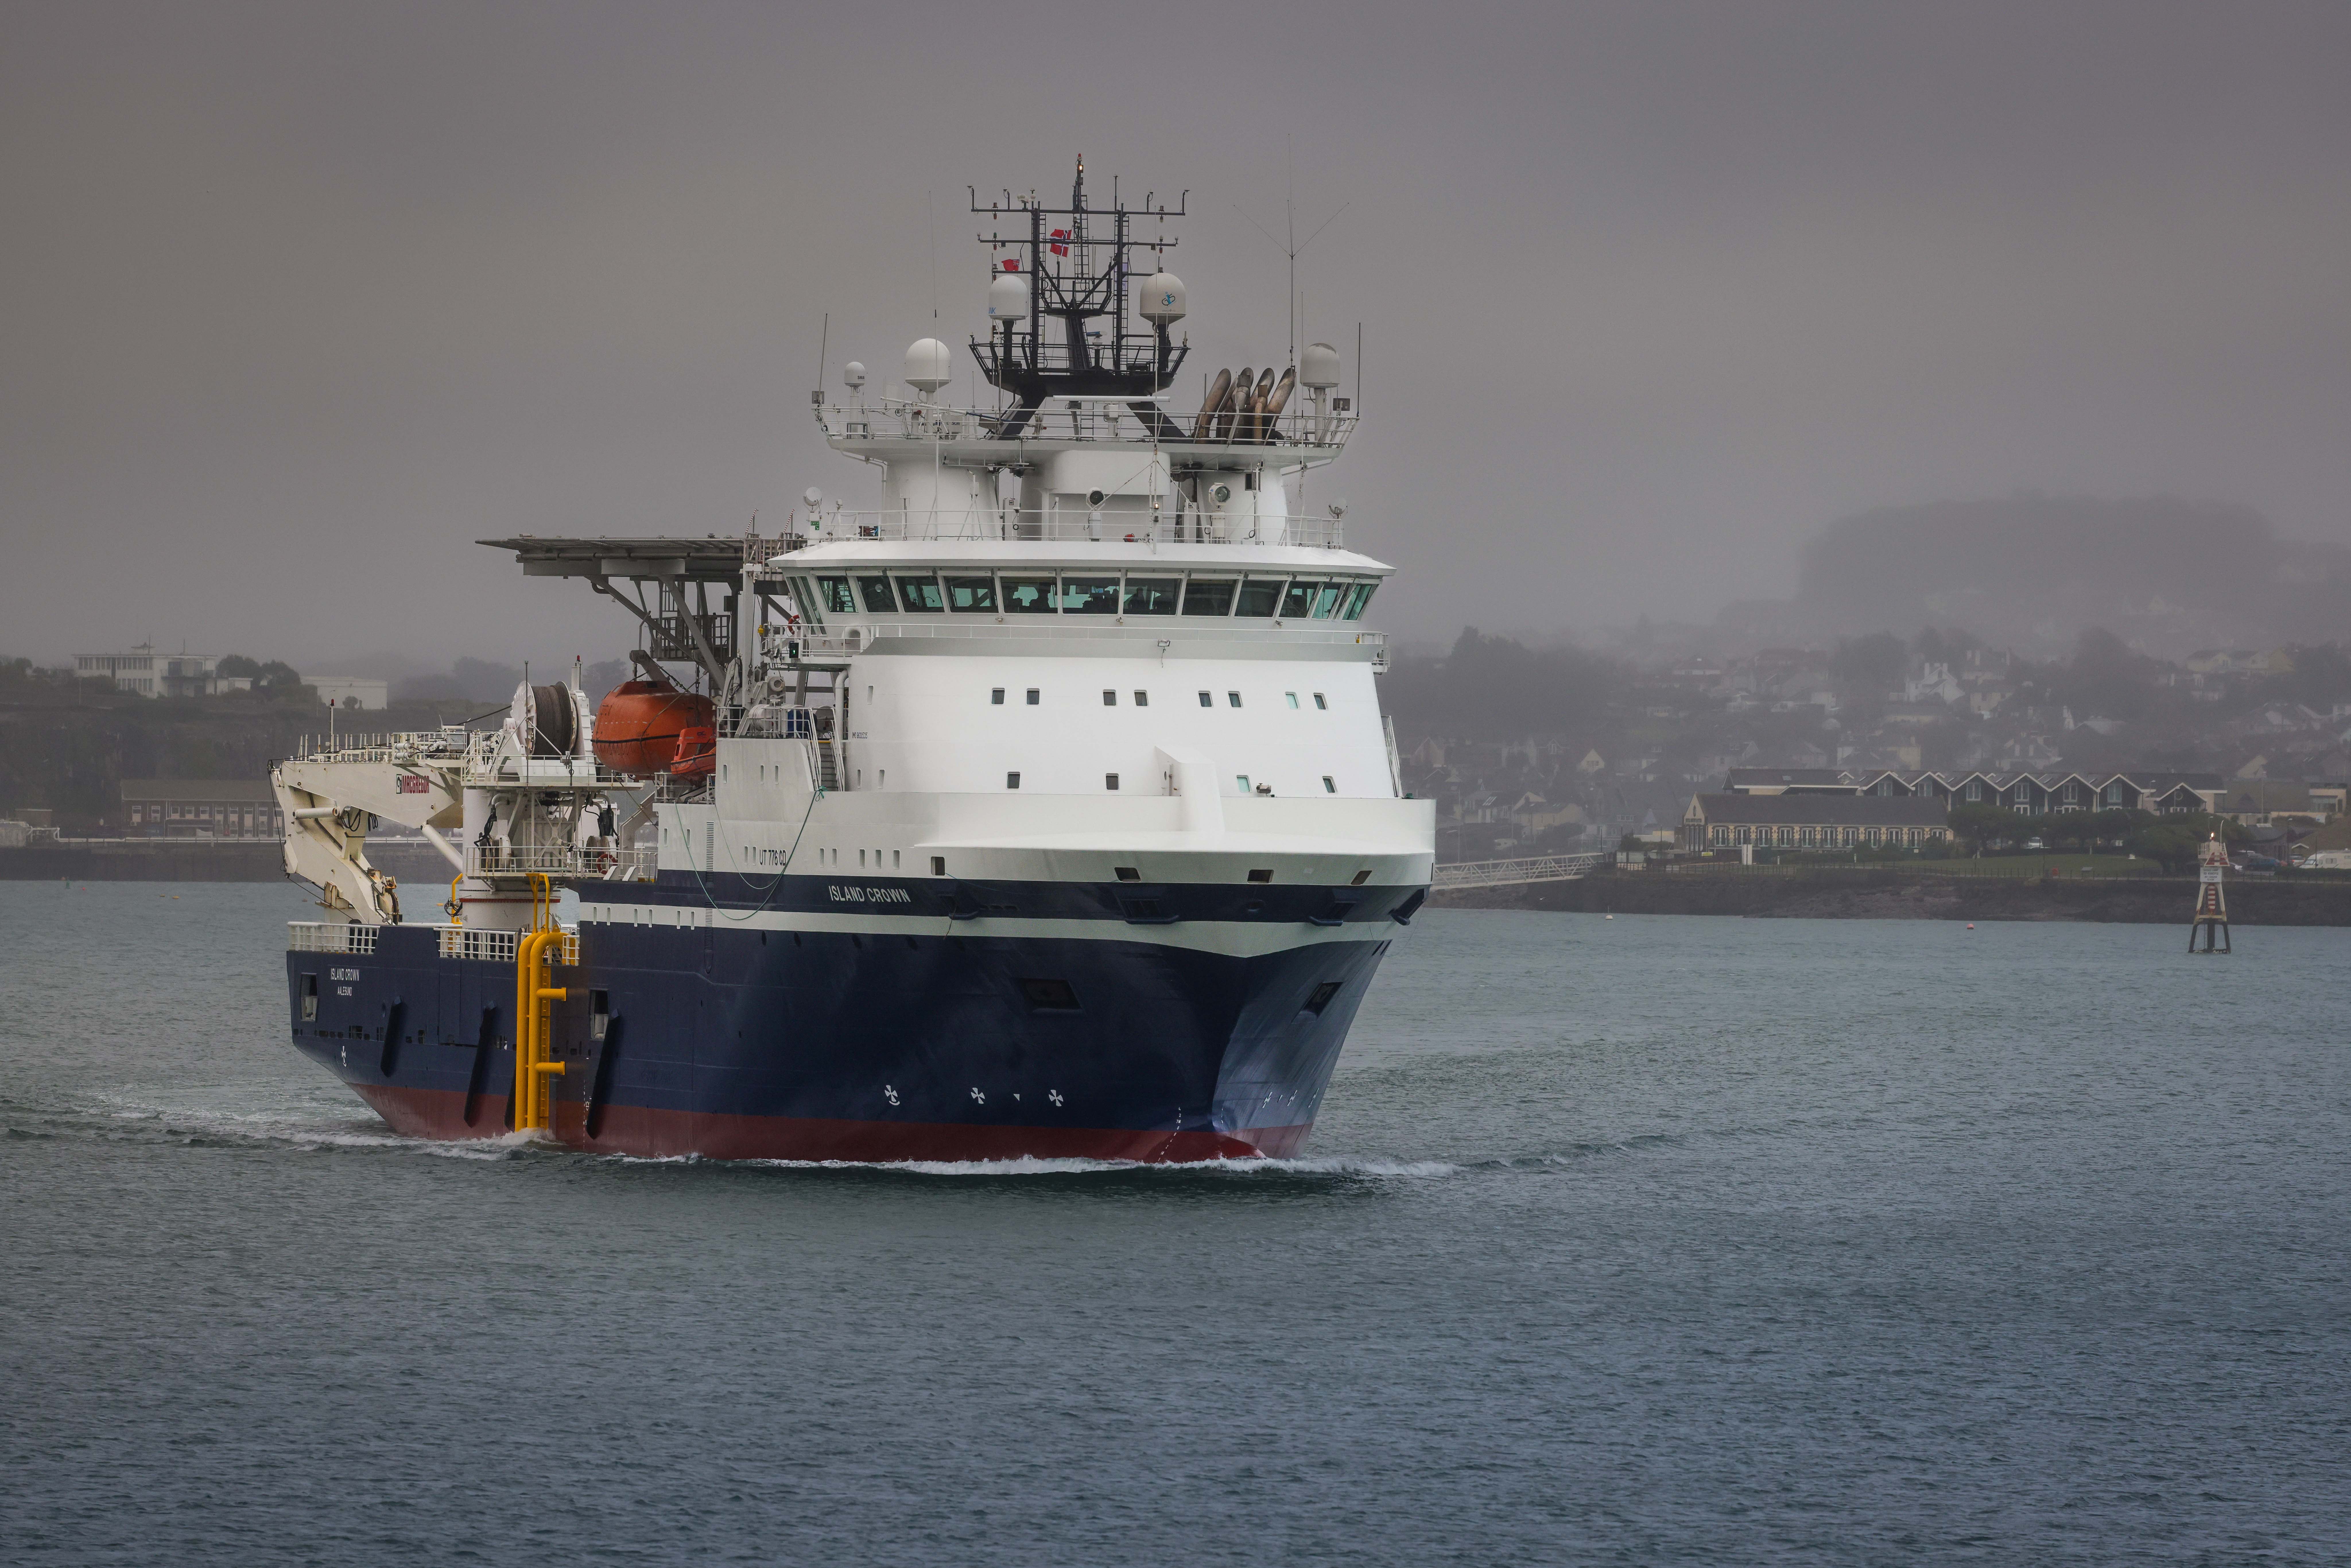 Mine-hunting ‘mother ship’ arrives in Plymouth